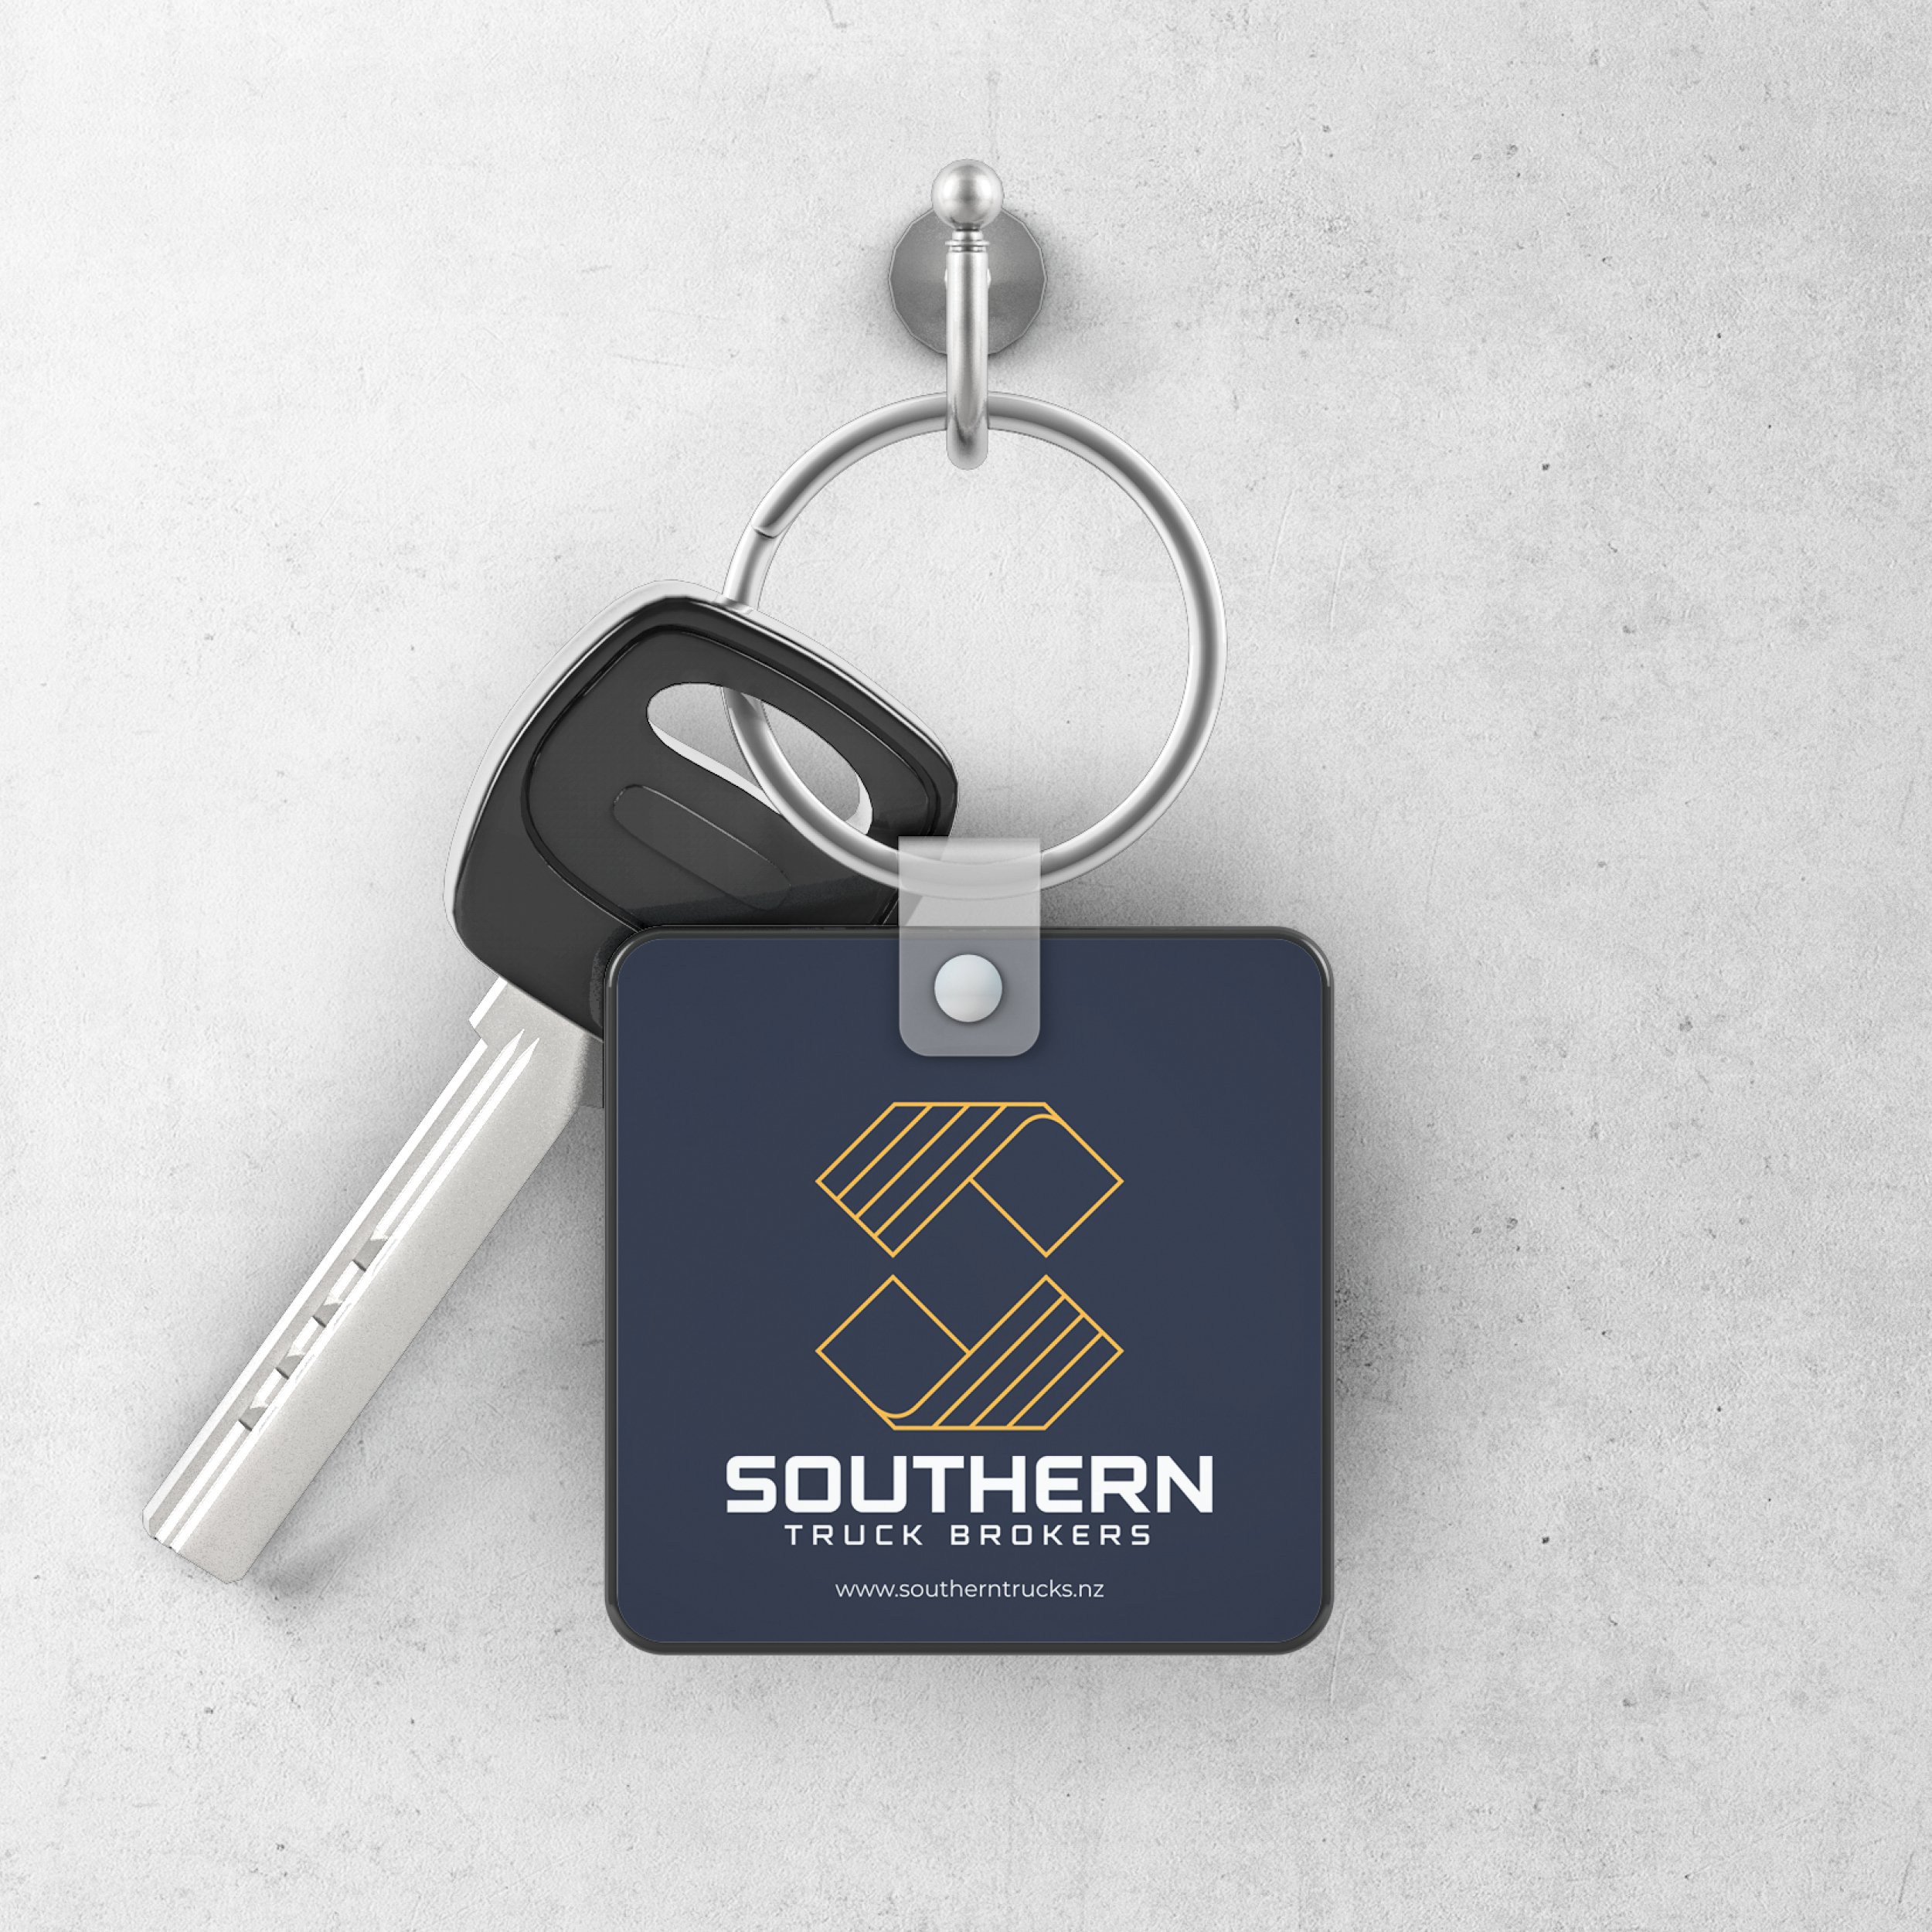 Southern Truck Brokers